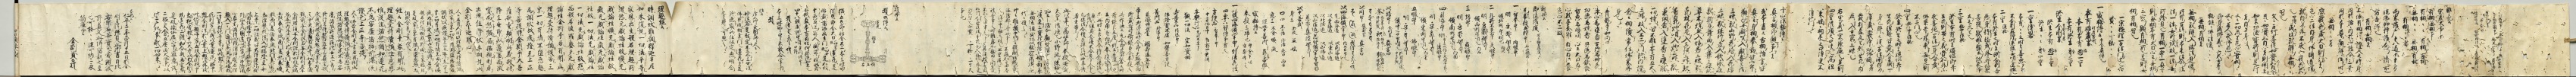 Scroll of Miscellaneous Notes written on a Calendar by Priest Seigen (recto)